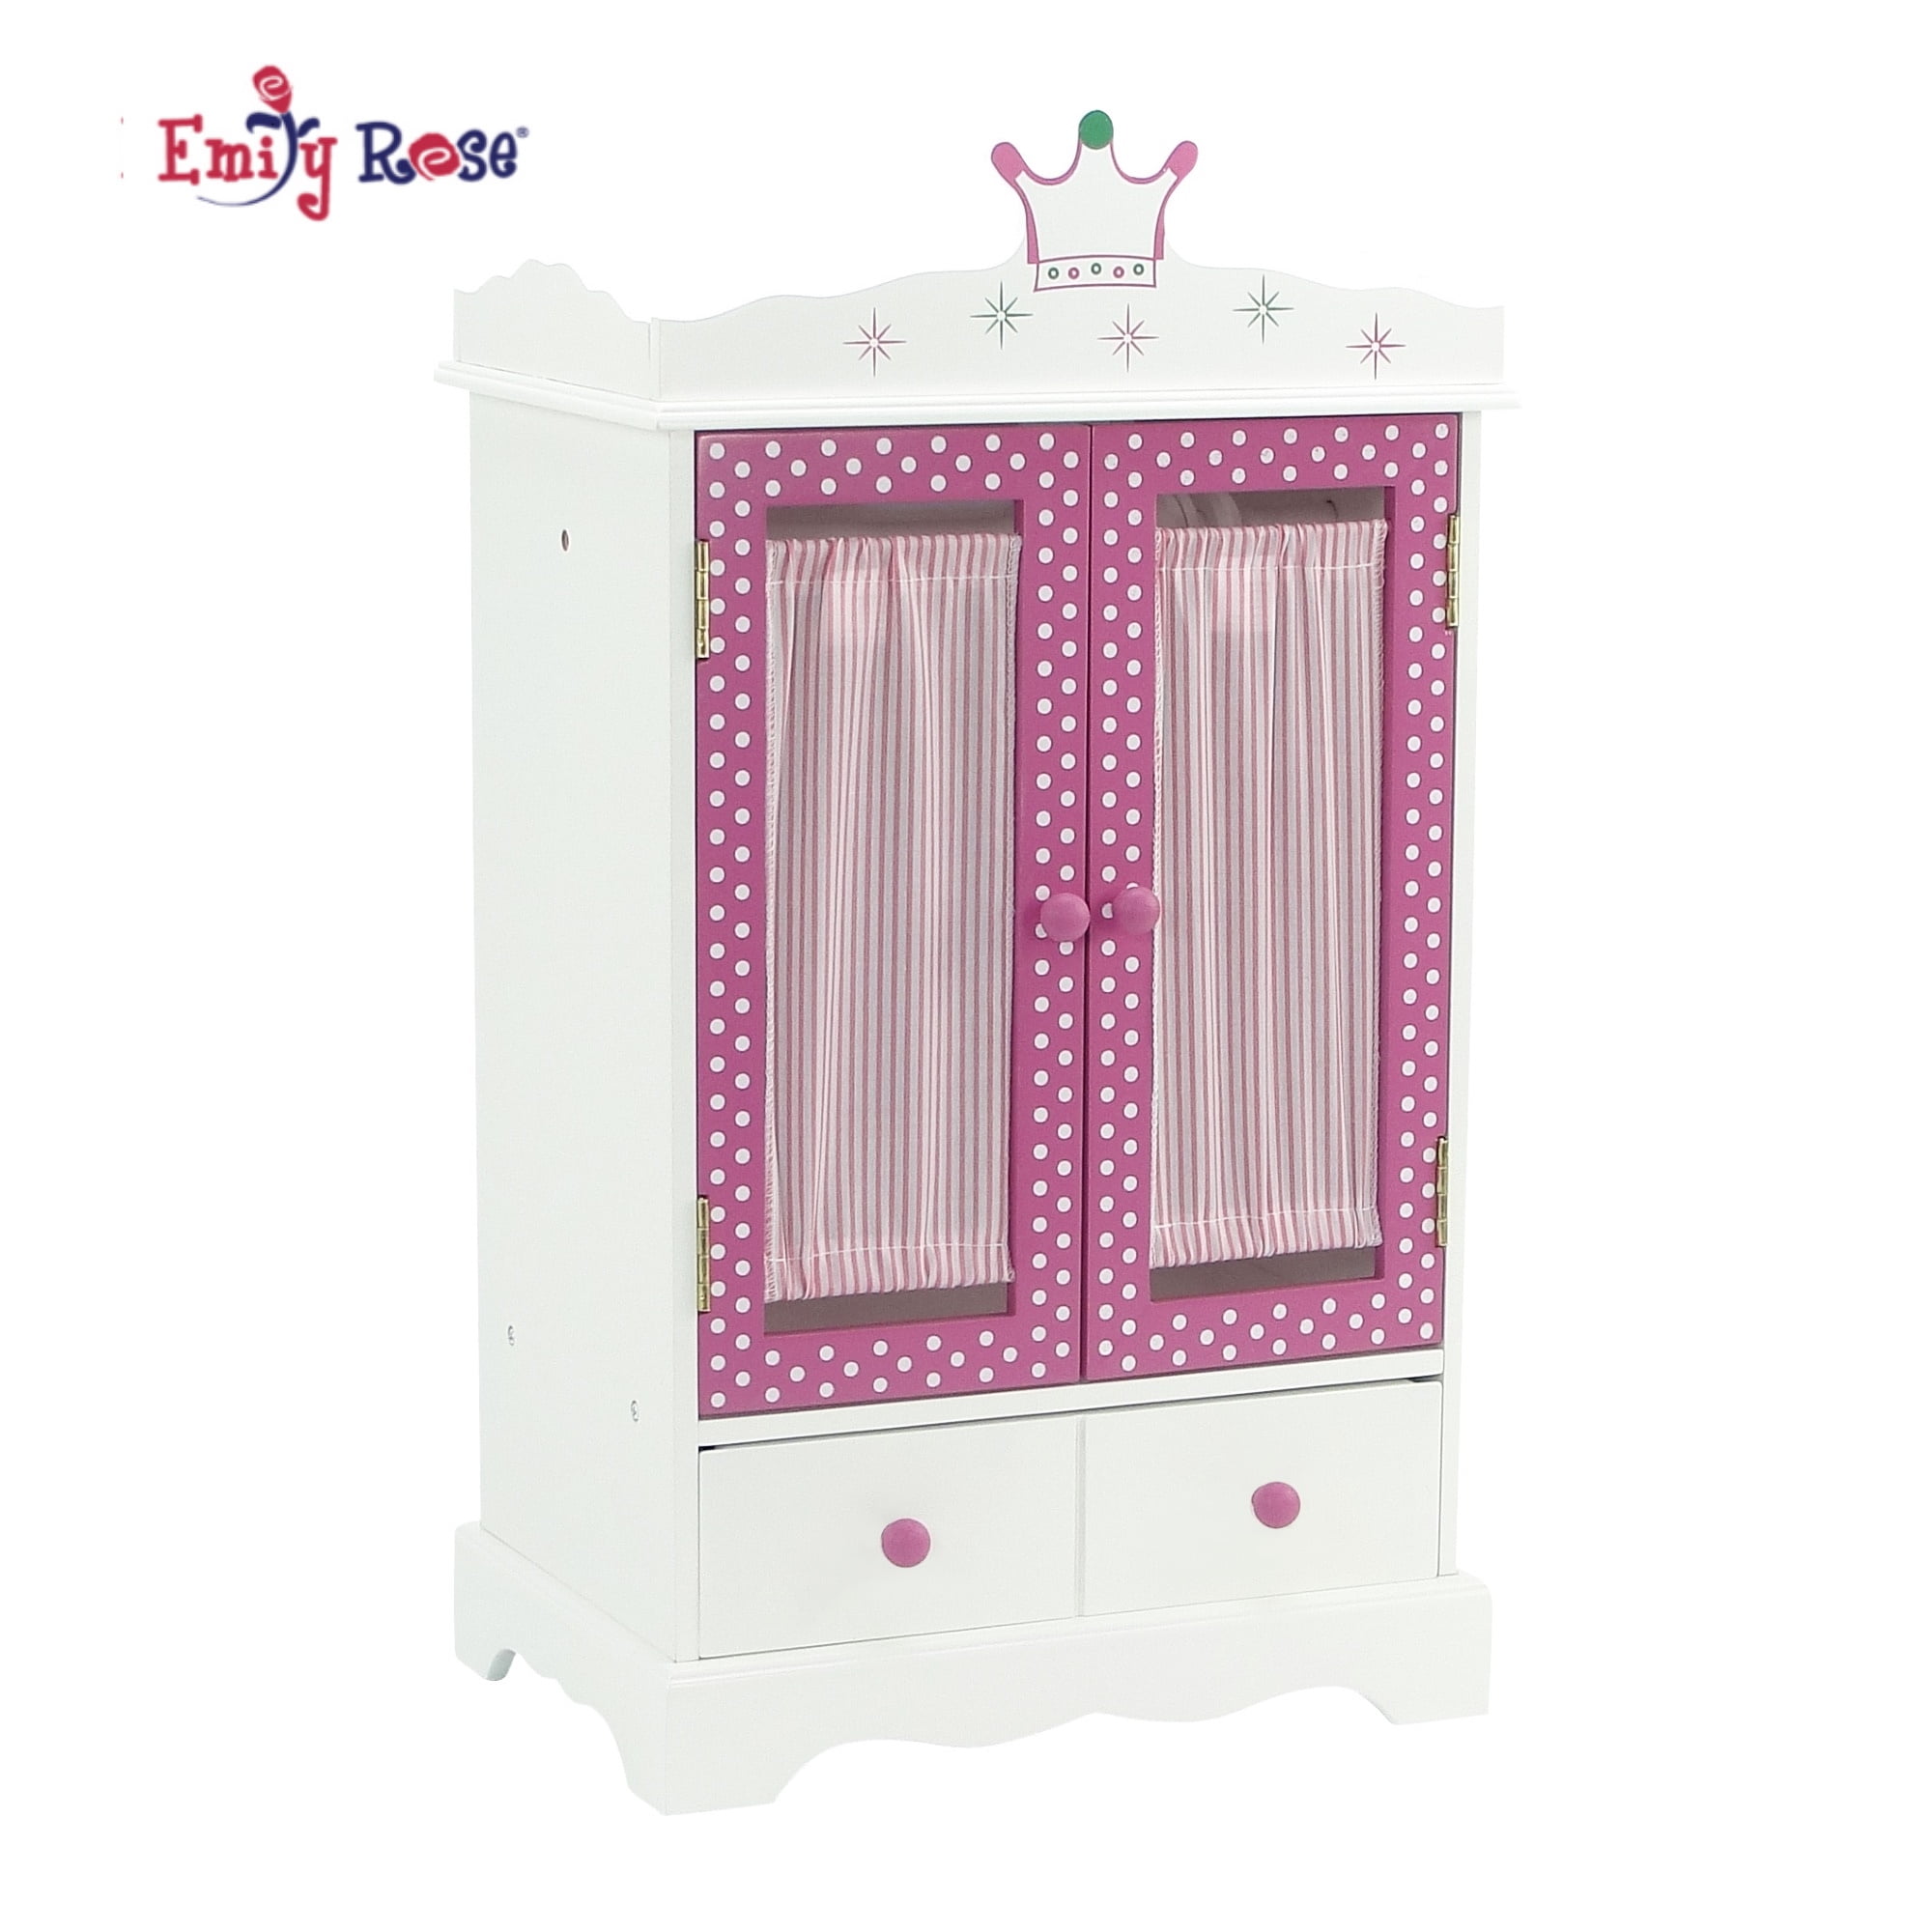 18-inch-doll-wish-crown-storage-doll-armoire-closet-furniture-fits